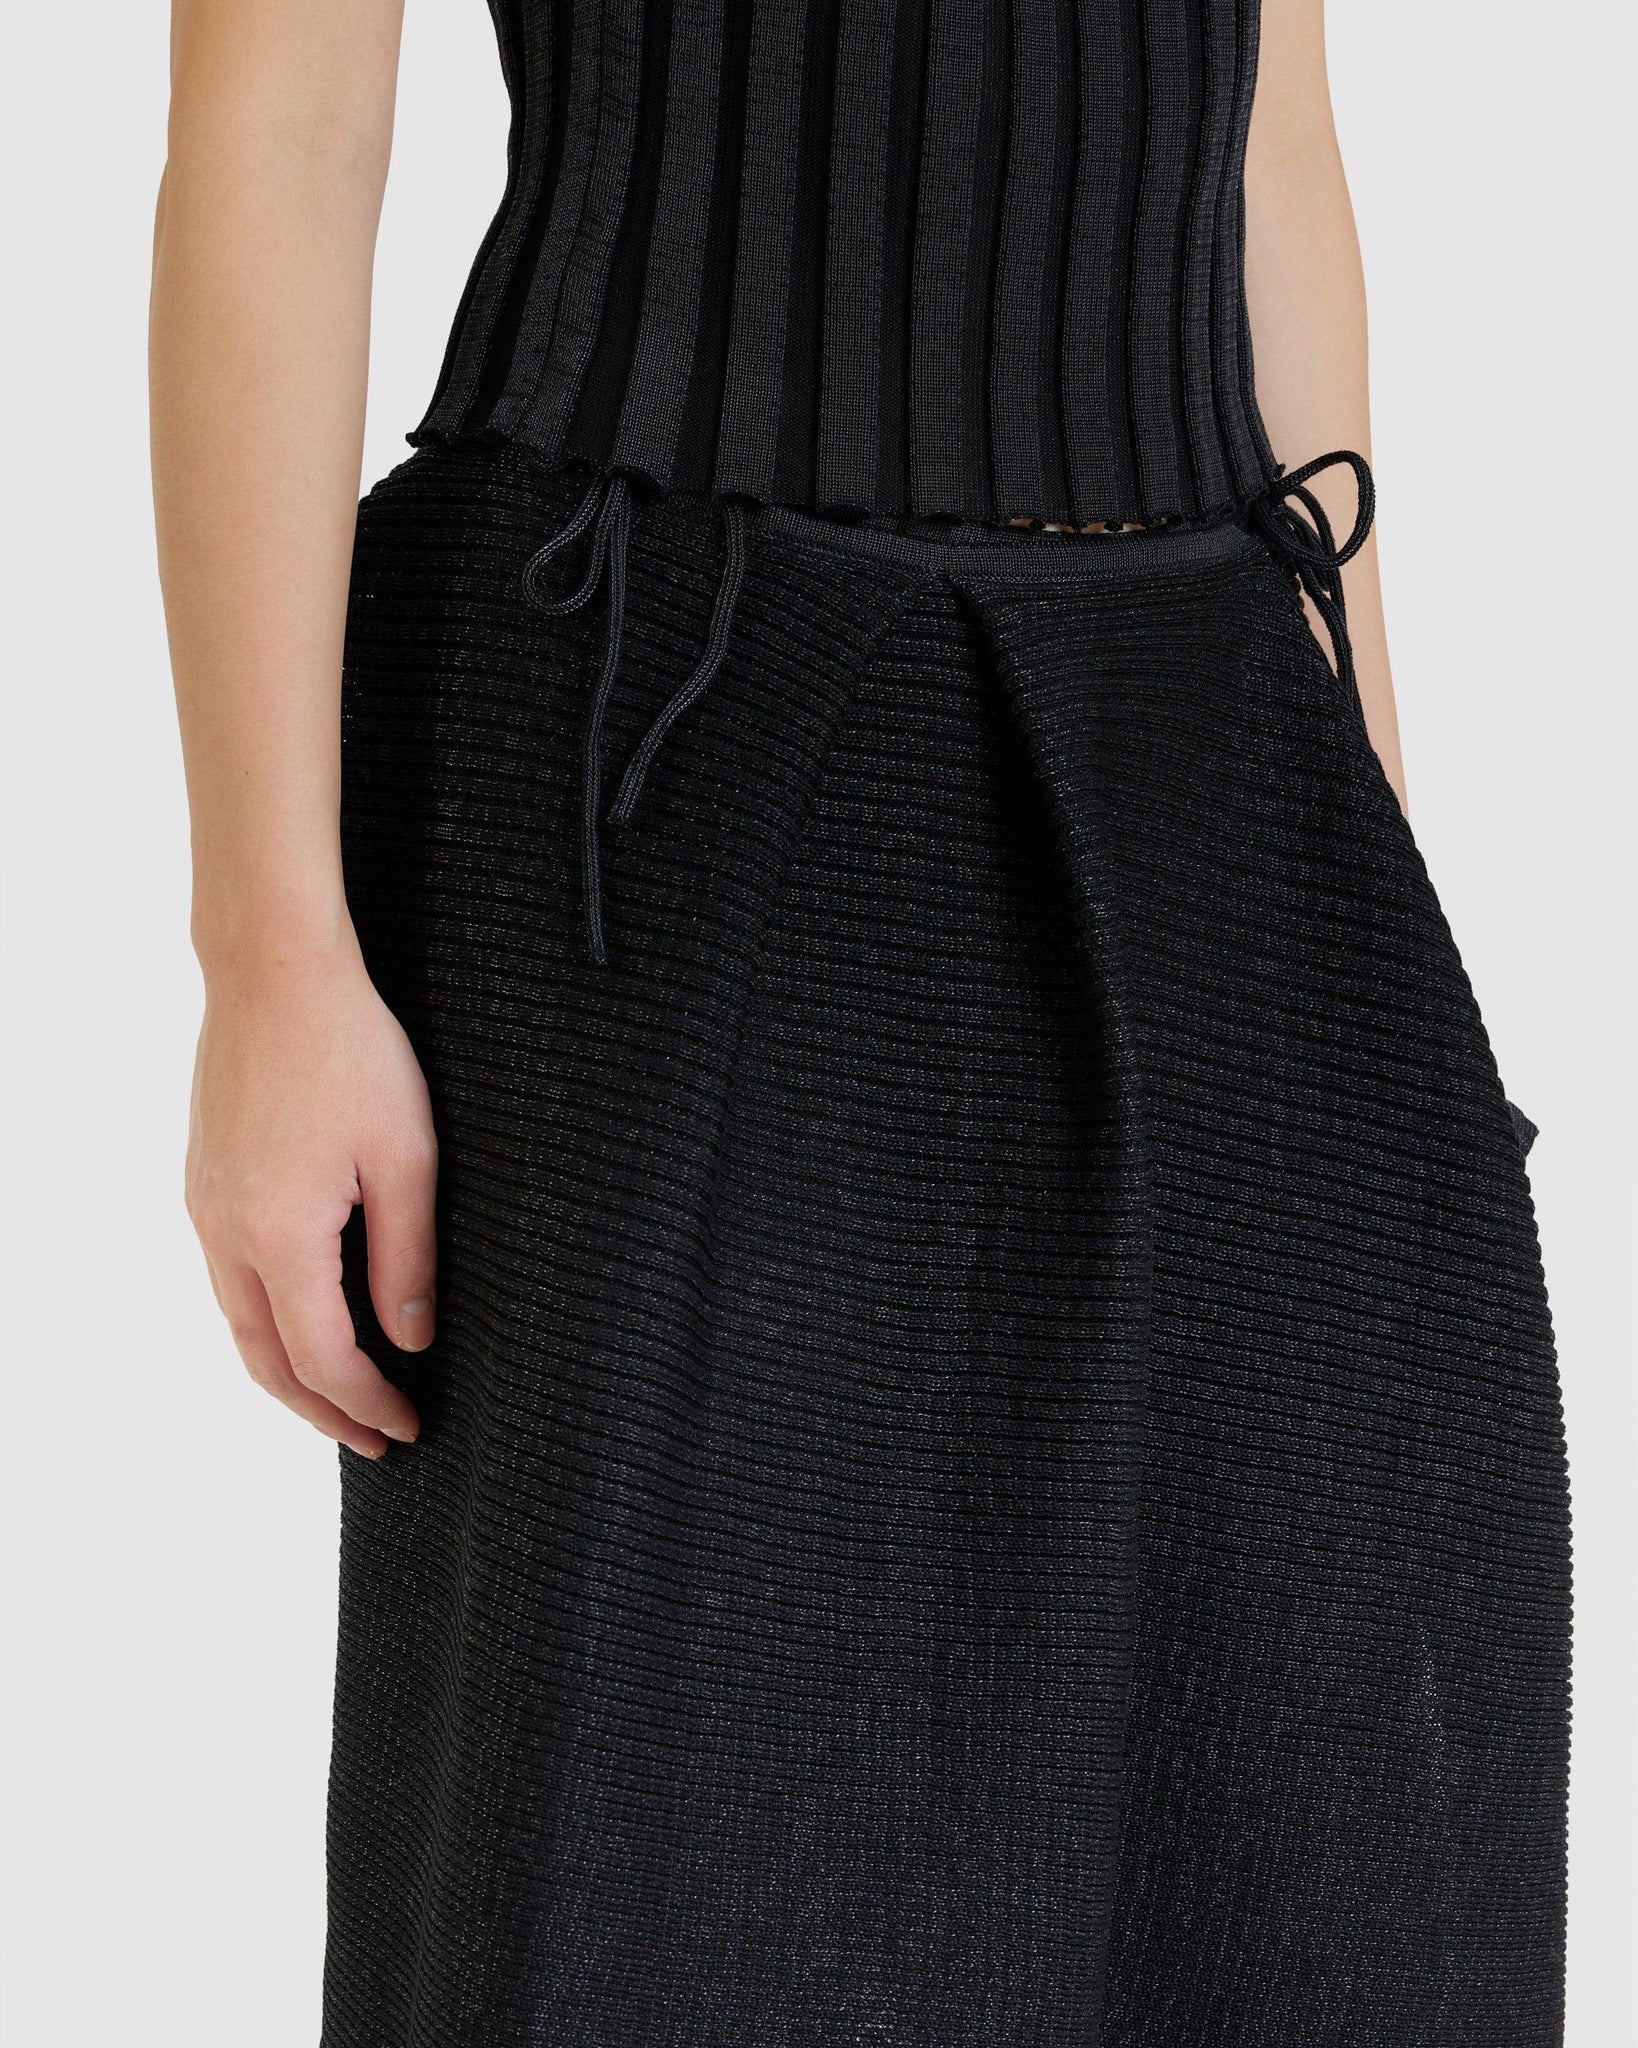 Emma Drape Skirt - {{ collection.title }} - Chinatown Country Club 